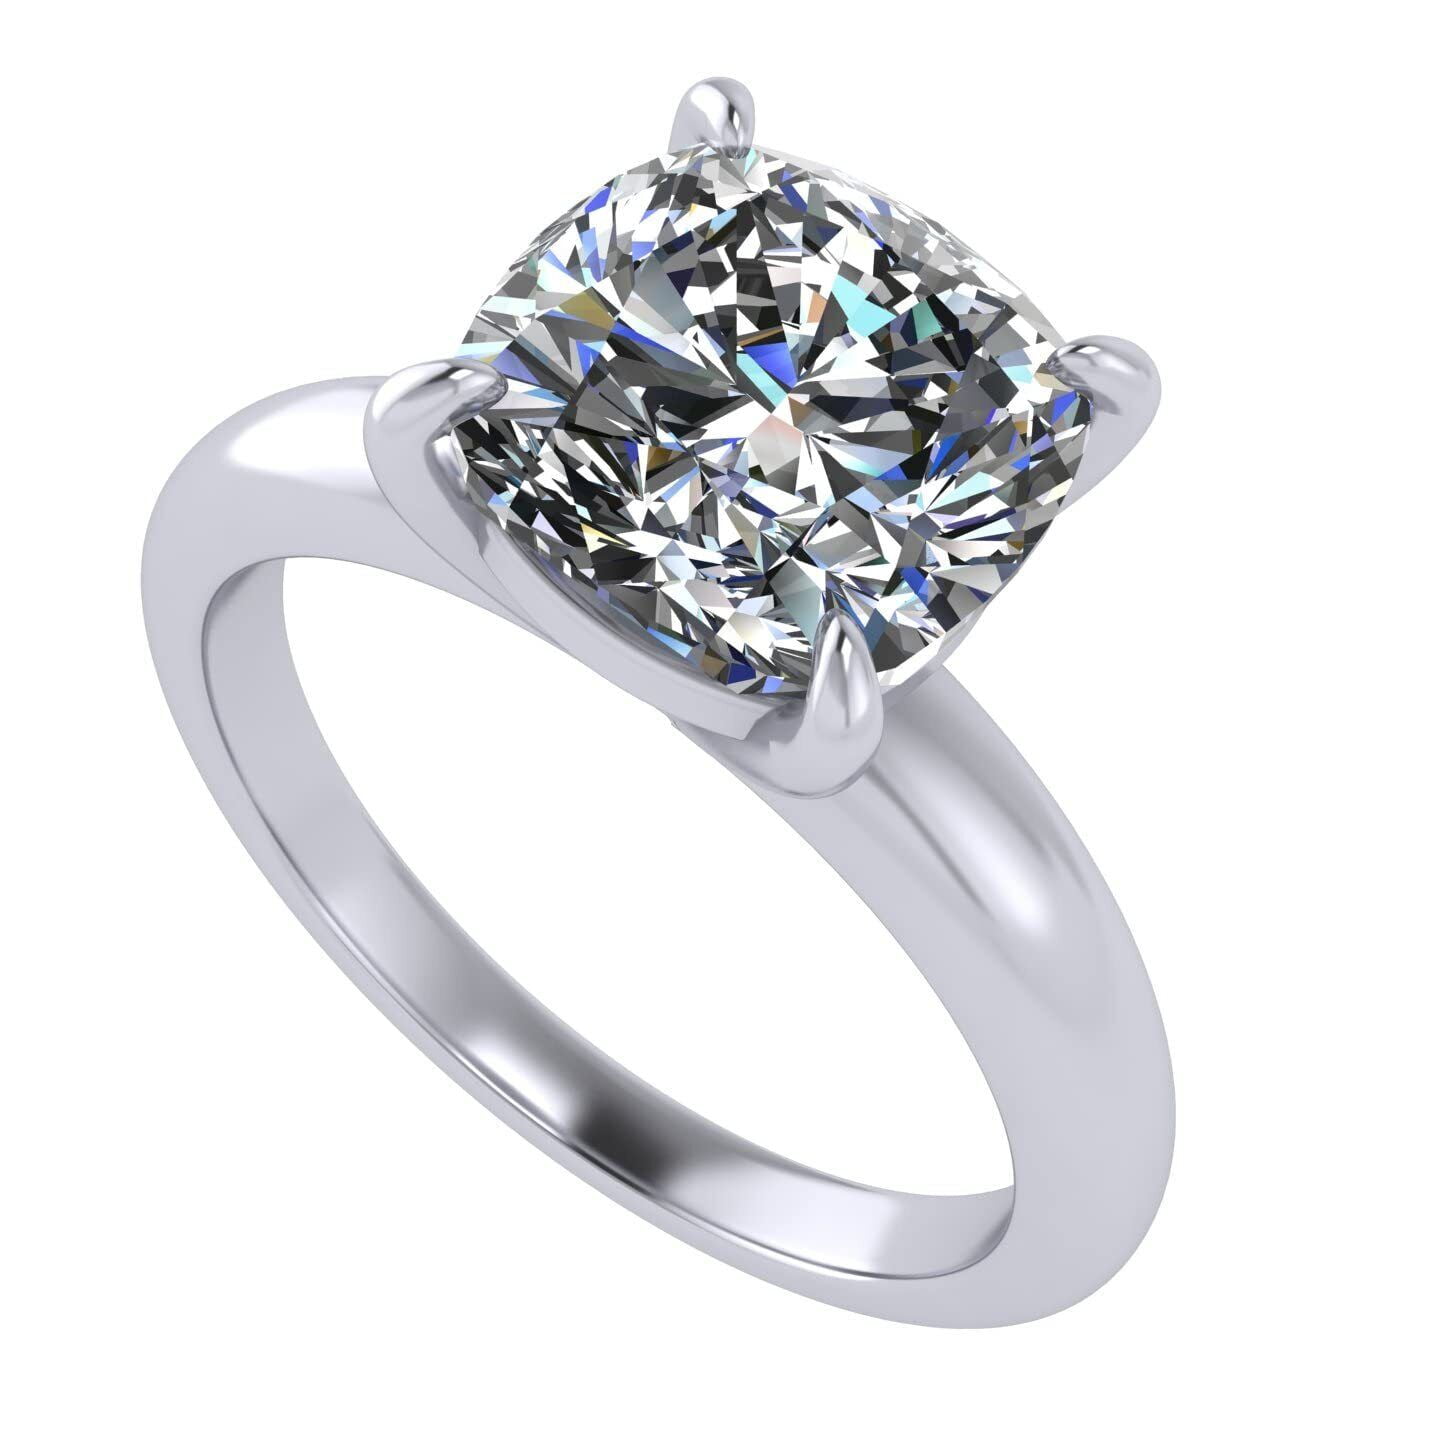 Vogue Prong Cushion Cut 925 Silver Solitaire Engagement Ring 3.00ct  Platinum Plated Size